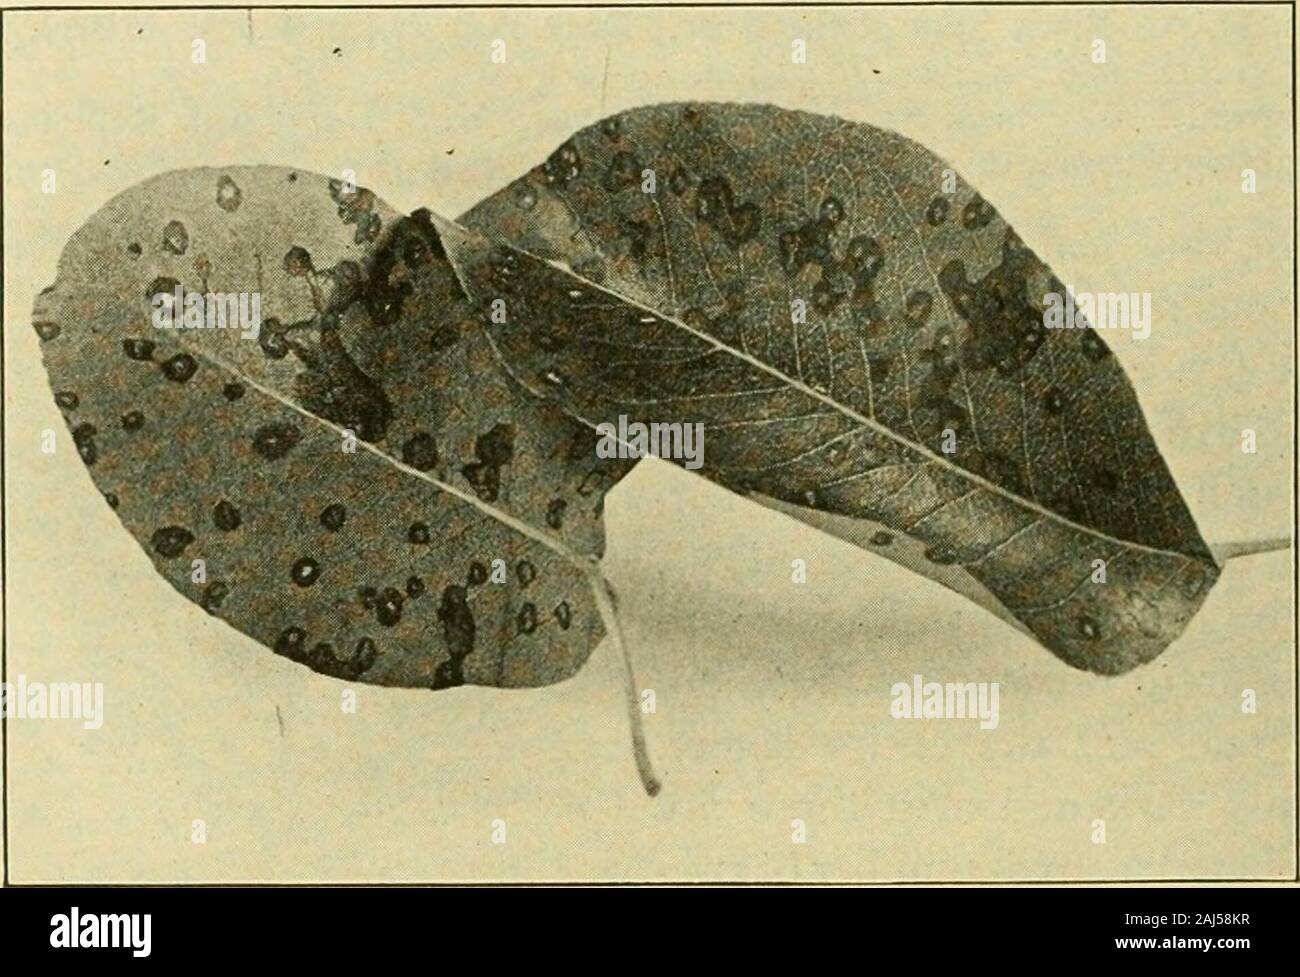 Fungous diseases of plants . Fig. 175. Leaf Blotch of Rose 358 FUNGOUS DISEASES OF PLANTS XLIX. LEAF SPOT OF THE PEAR Septoria Pyricola Desm. DuGGAR, B. M. Some Important Pear Diseases. Leaf Spot. Cornell Agl.Exp. Sta. Built. 145: 597-611. figs. 1^7-16^. 1898. The leaf spot of pear is a disease whicli may be readily dis-tinguished from the leaf blight subsequently described. It occursthroughout the eastern United States as an important fungus, both. Fig. 176. Leaf Siot of Pear in orchards and nurseries. It is probably found throughout NorthAmerica and is reported from various parts of Europe. Stock Photo